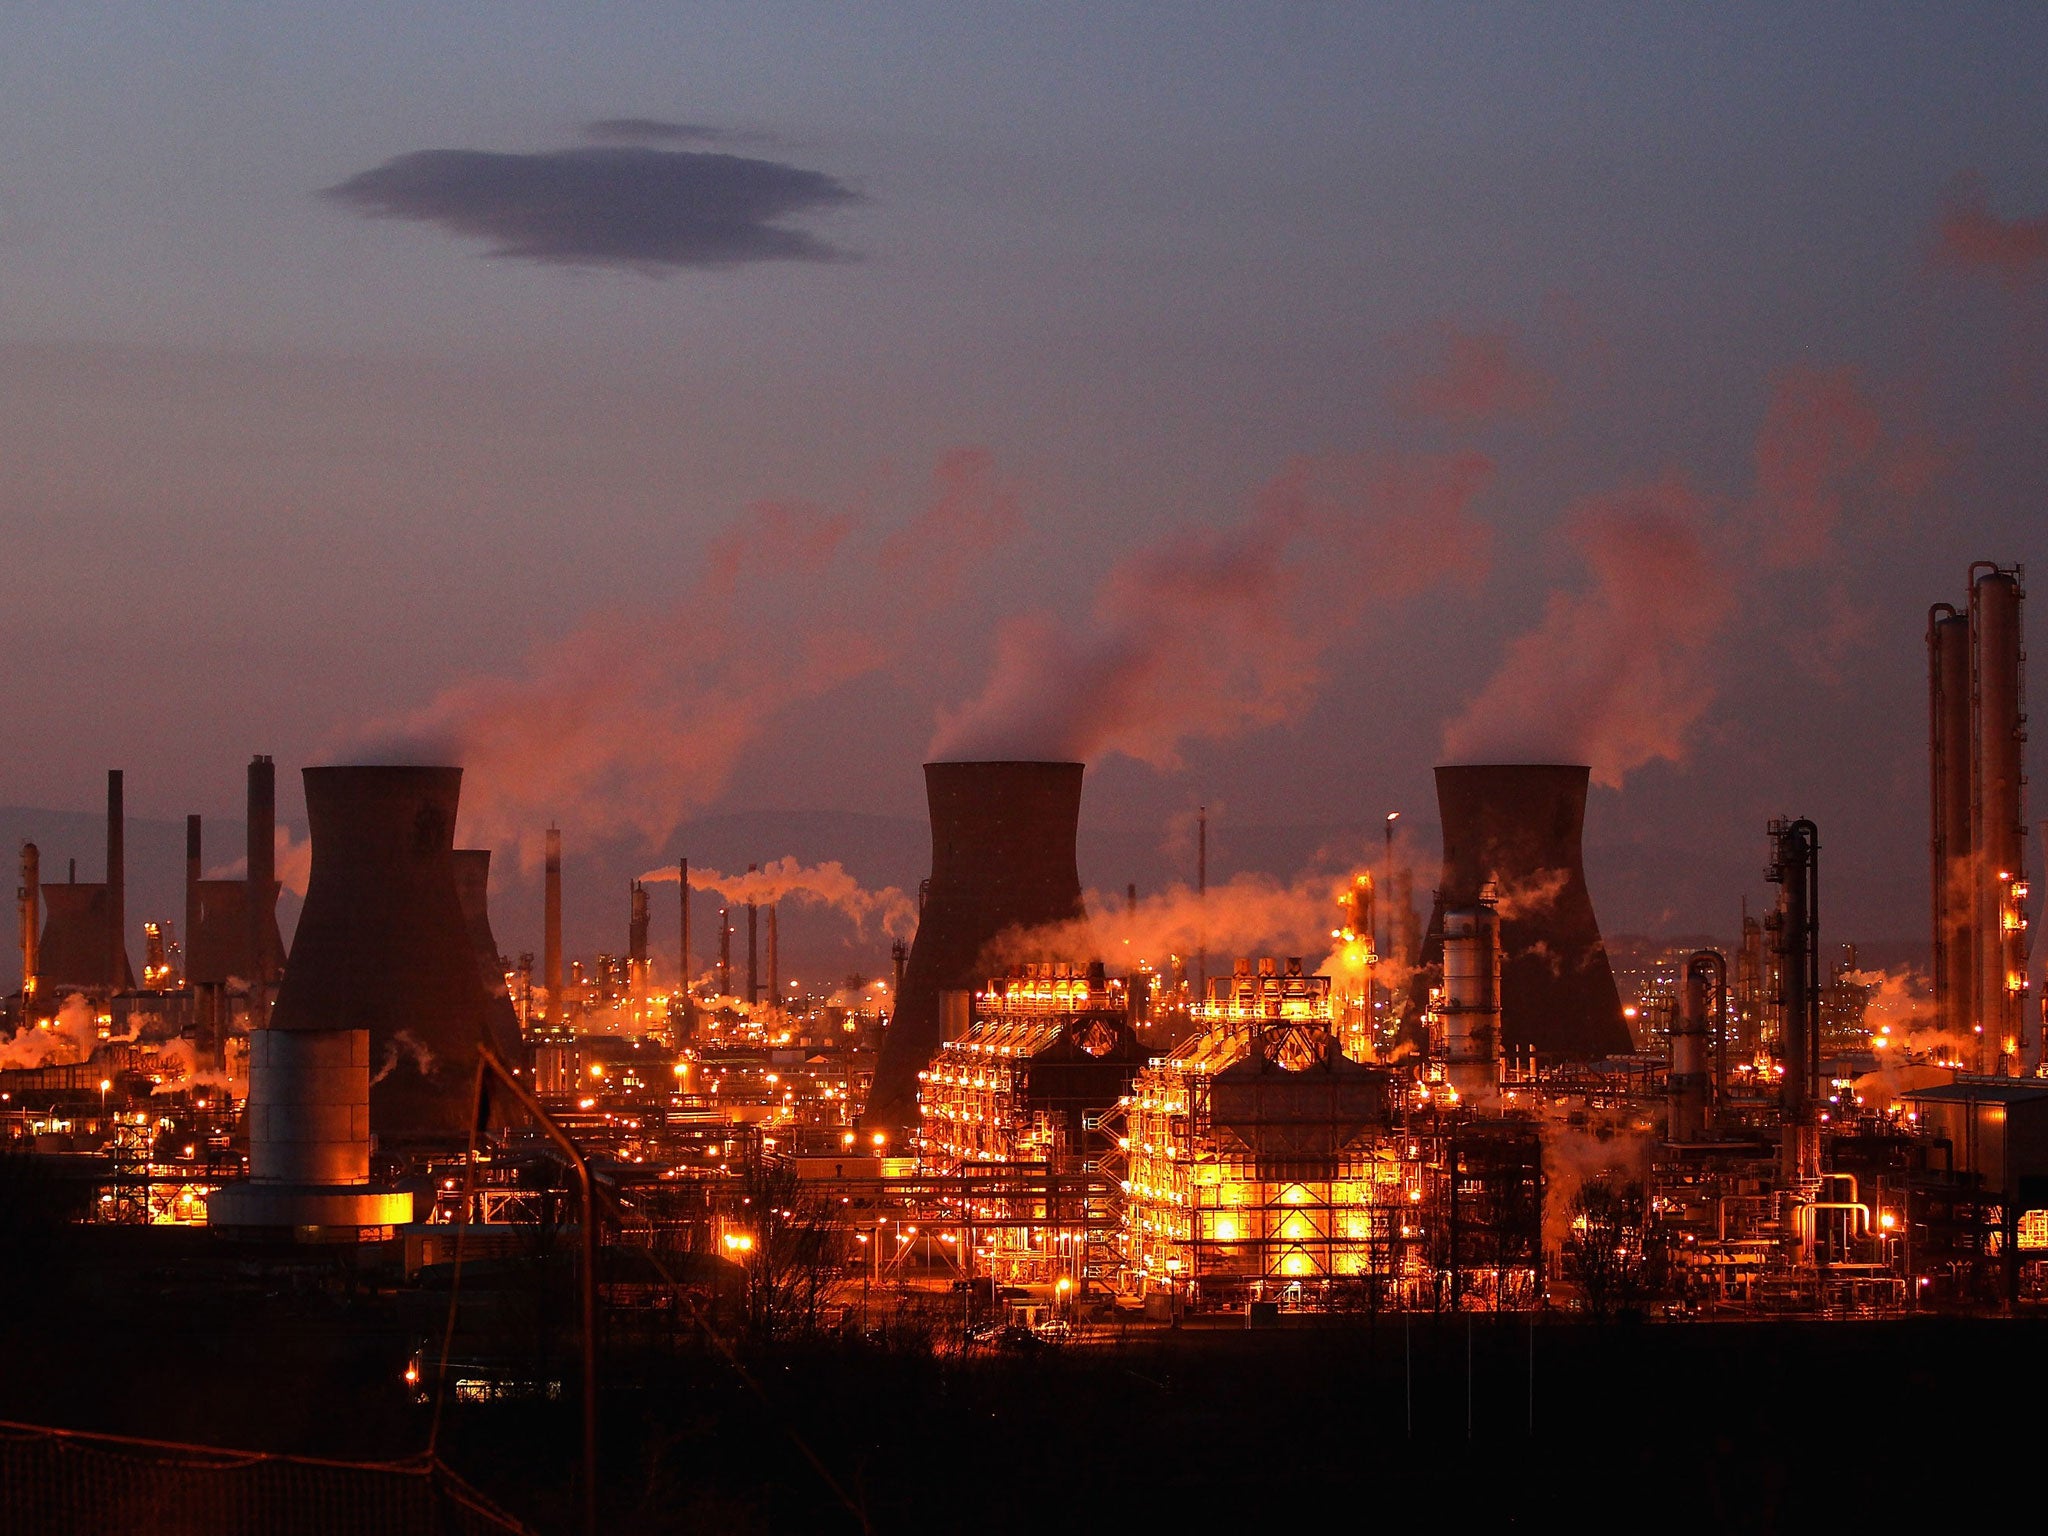 Grangemouth oil refinery on the Firth of Forth processes the fuel used in Scotland